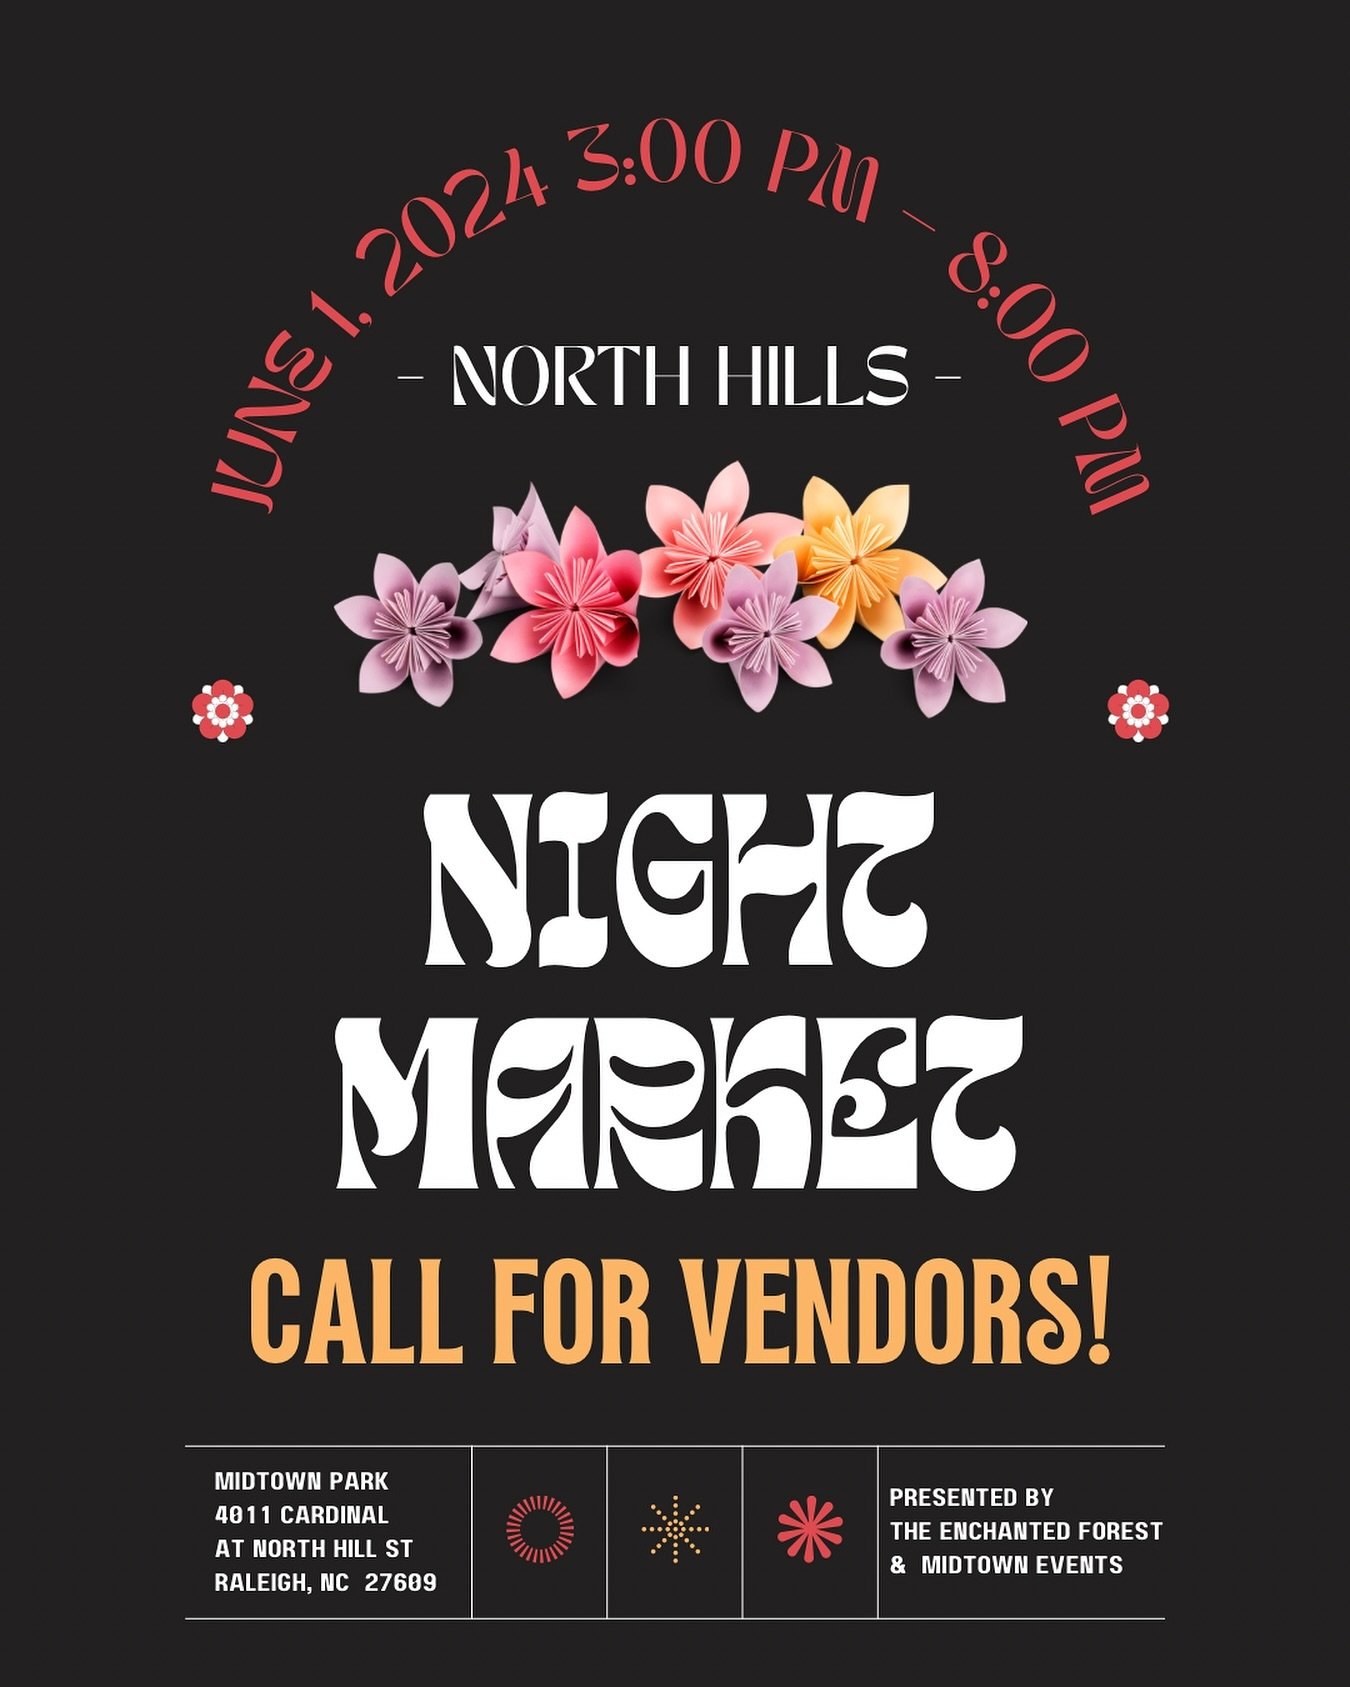 Call for vendors! 💖

Our next installation of the North Hills Night Market will be on June 1.

If you&rsquo;re interested in becoming a vendor, feel free to DM us!